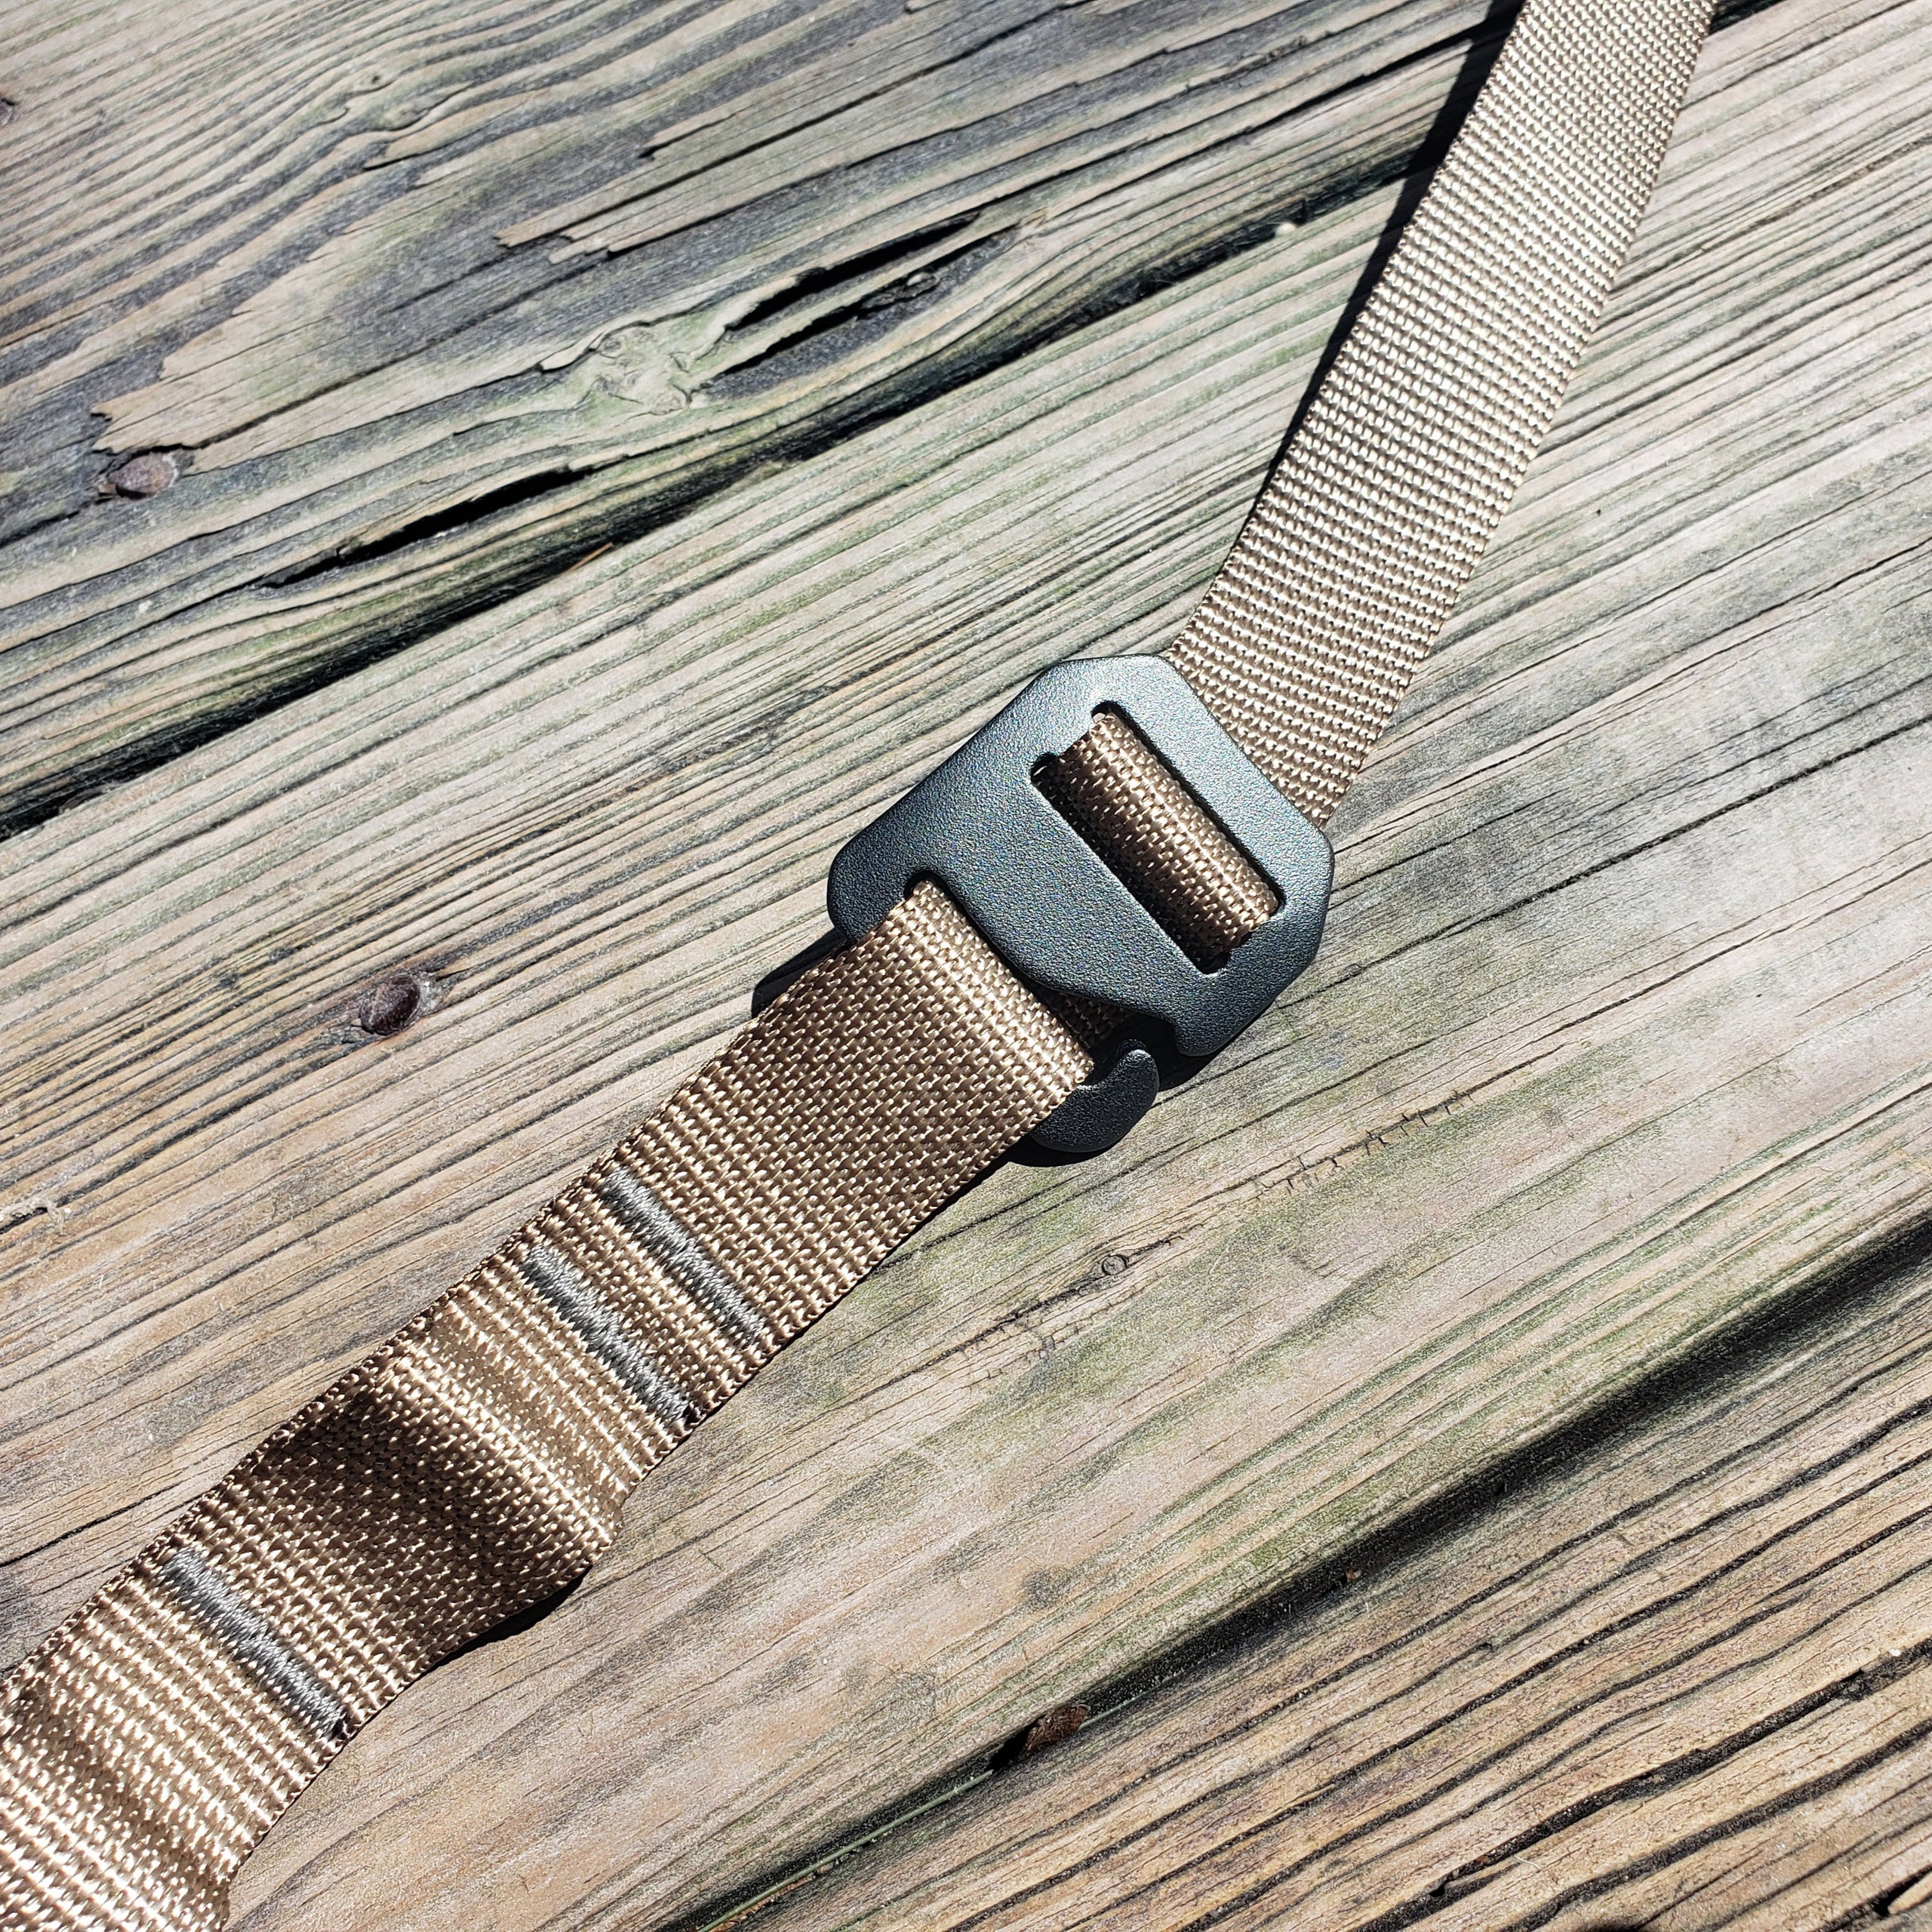 MUP Straps™ Mobile Utility Packing Strap System